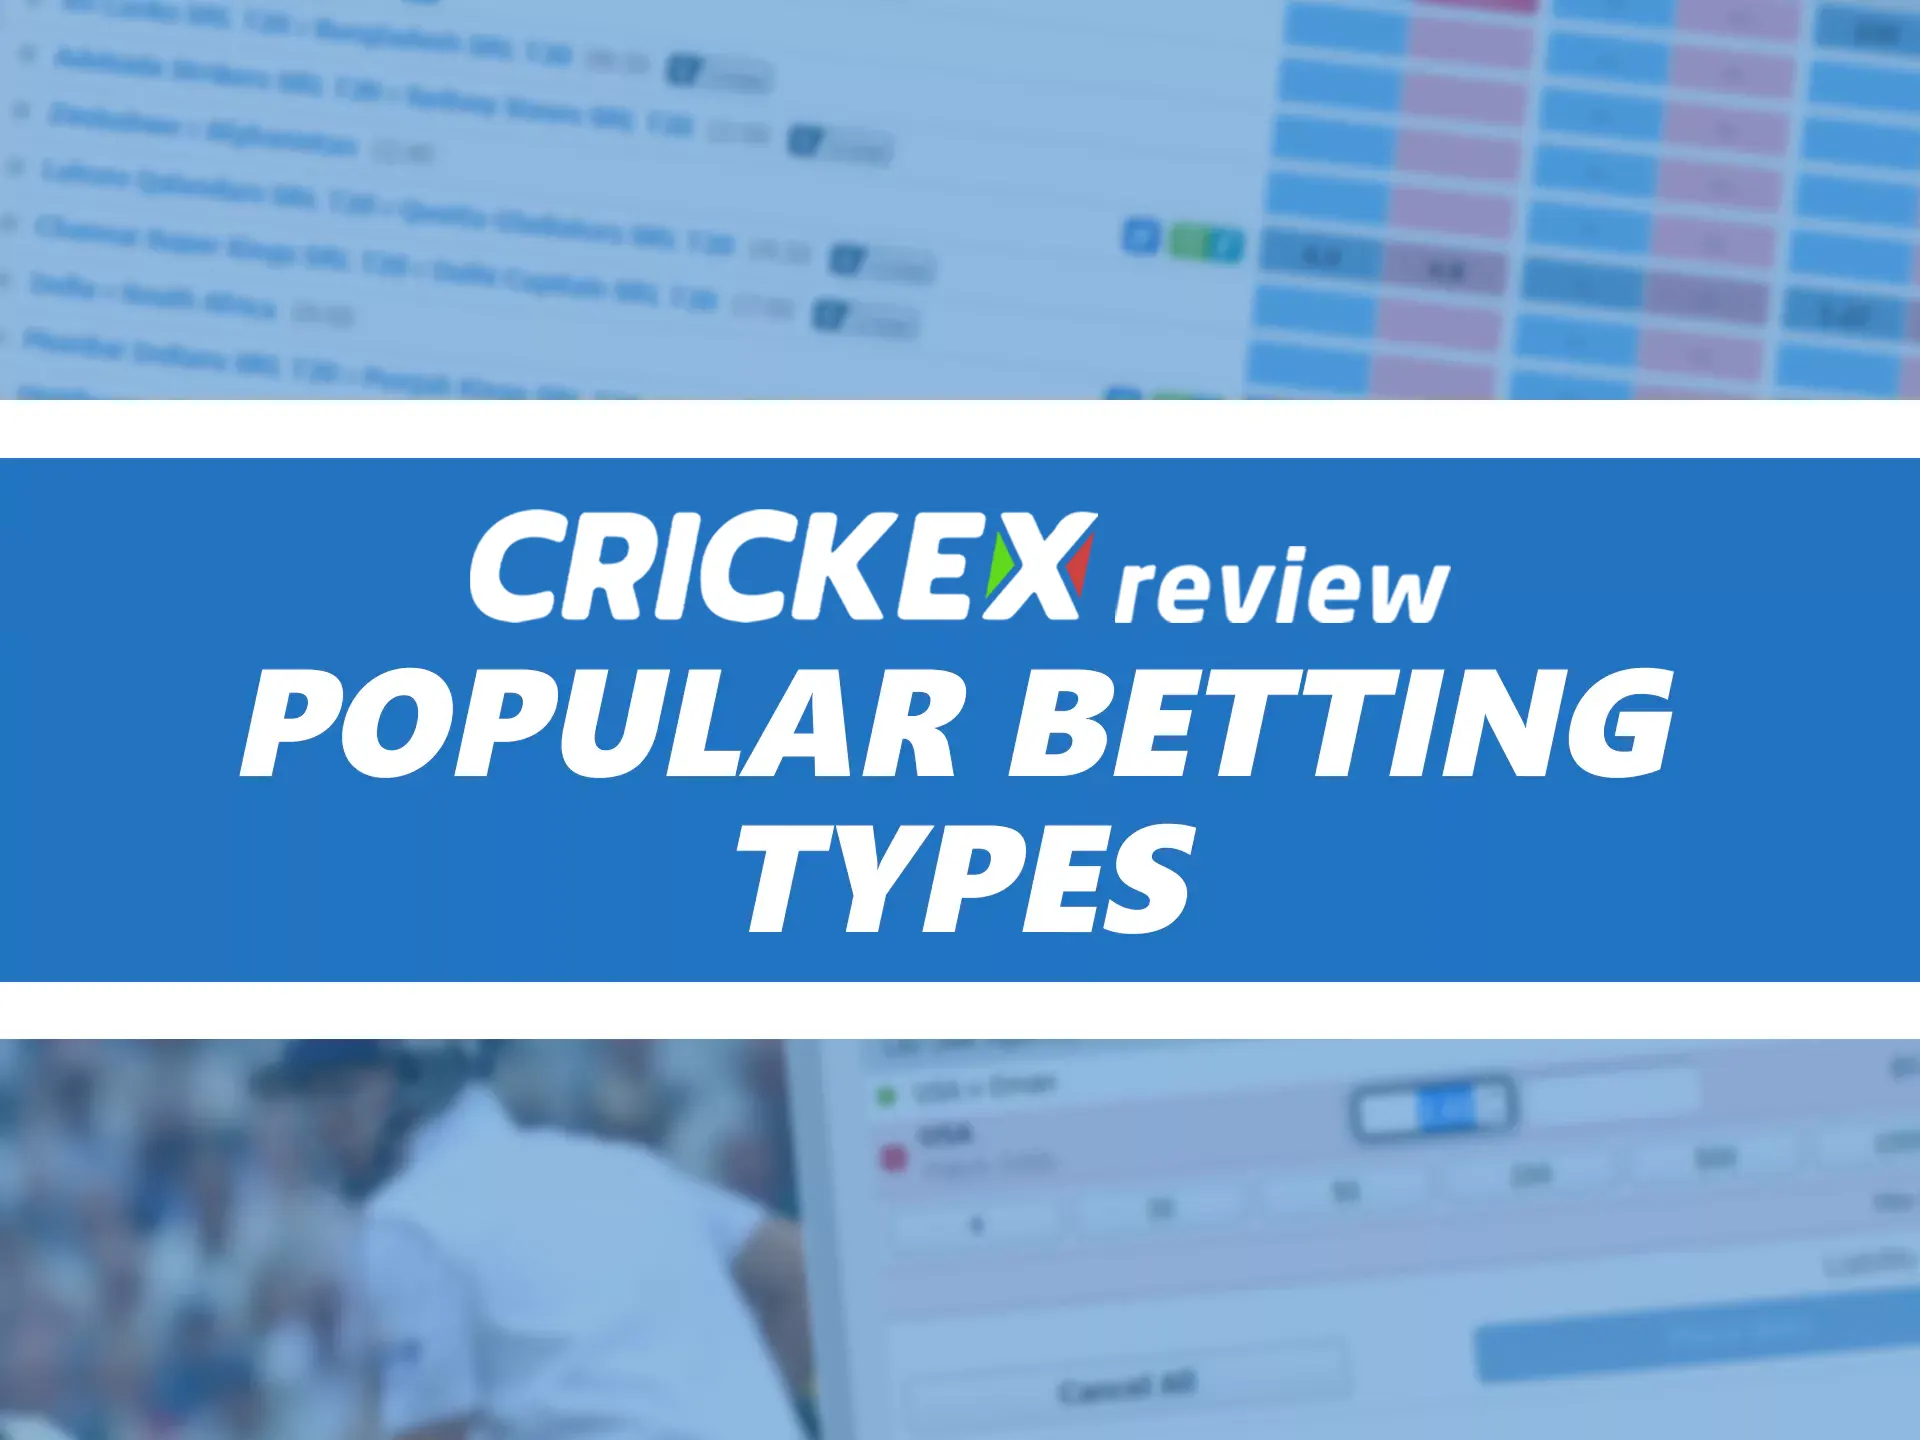 You have different option for betting at Crickex.